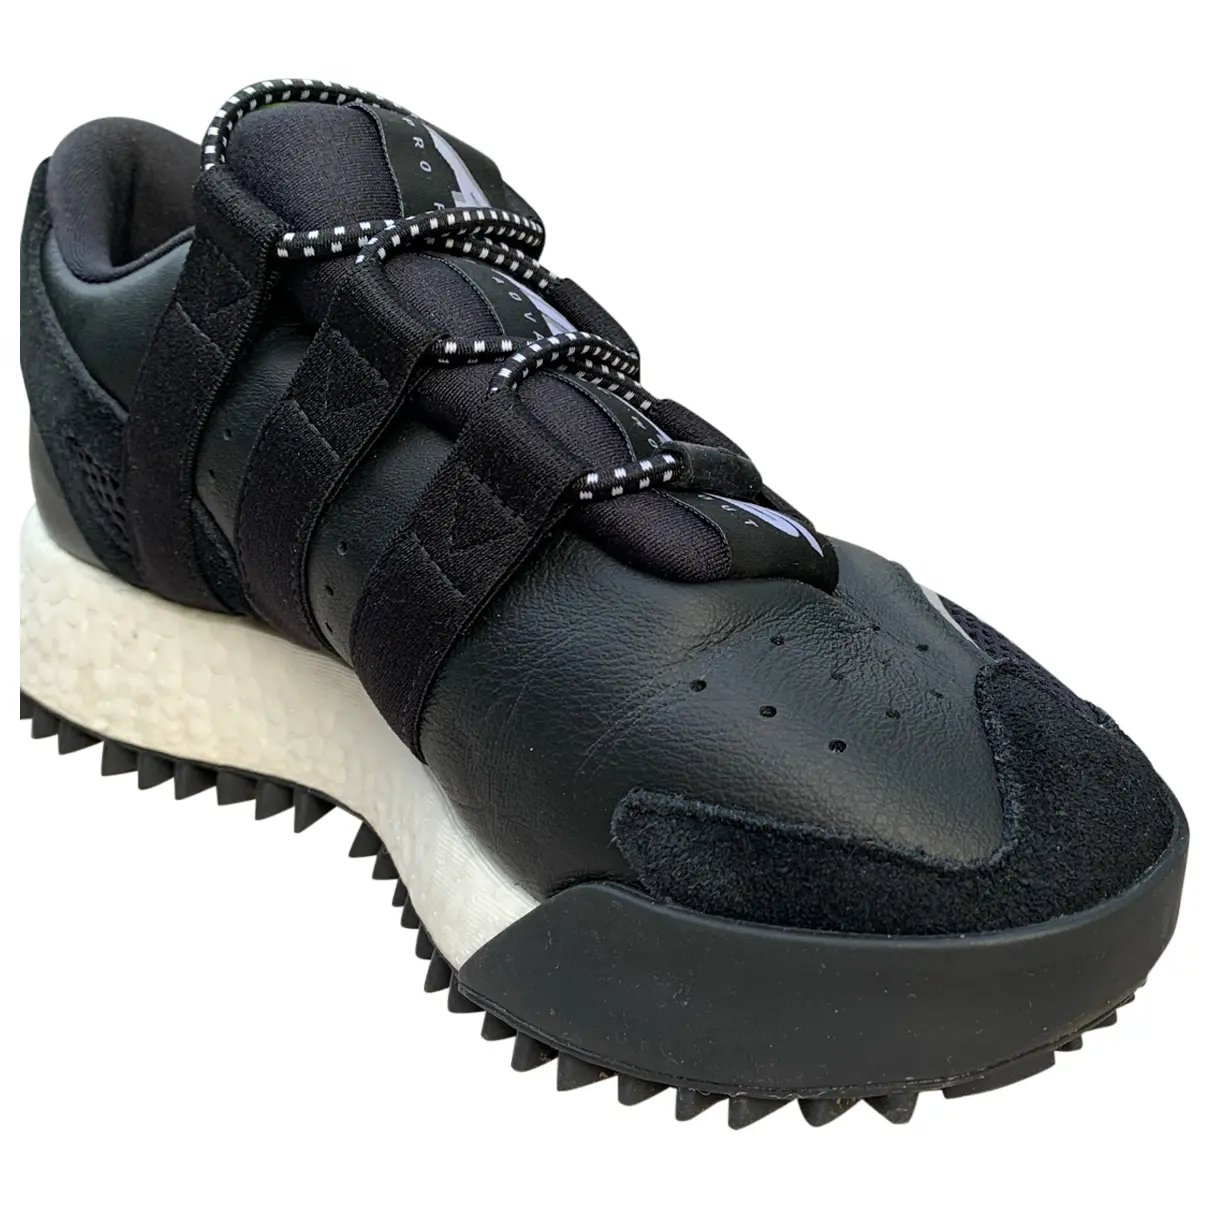 Leather trainers Adidas Originals x Alexander Wang